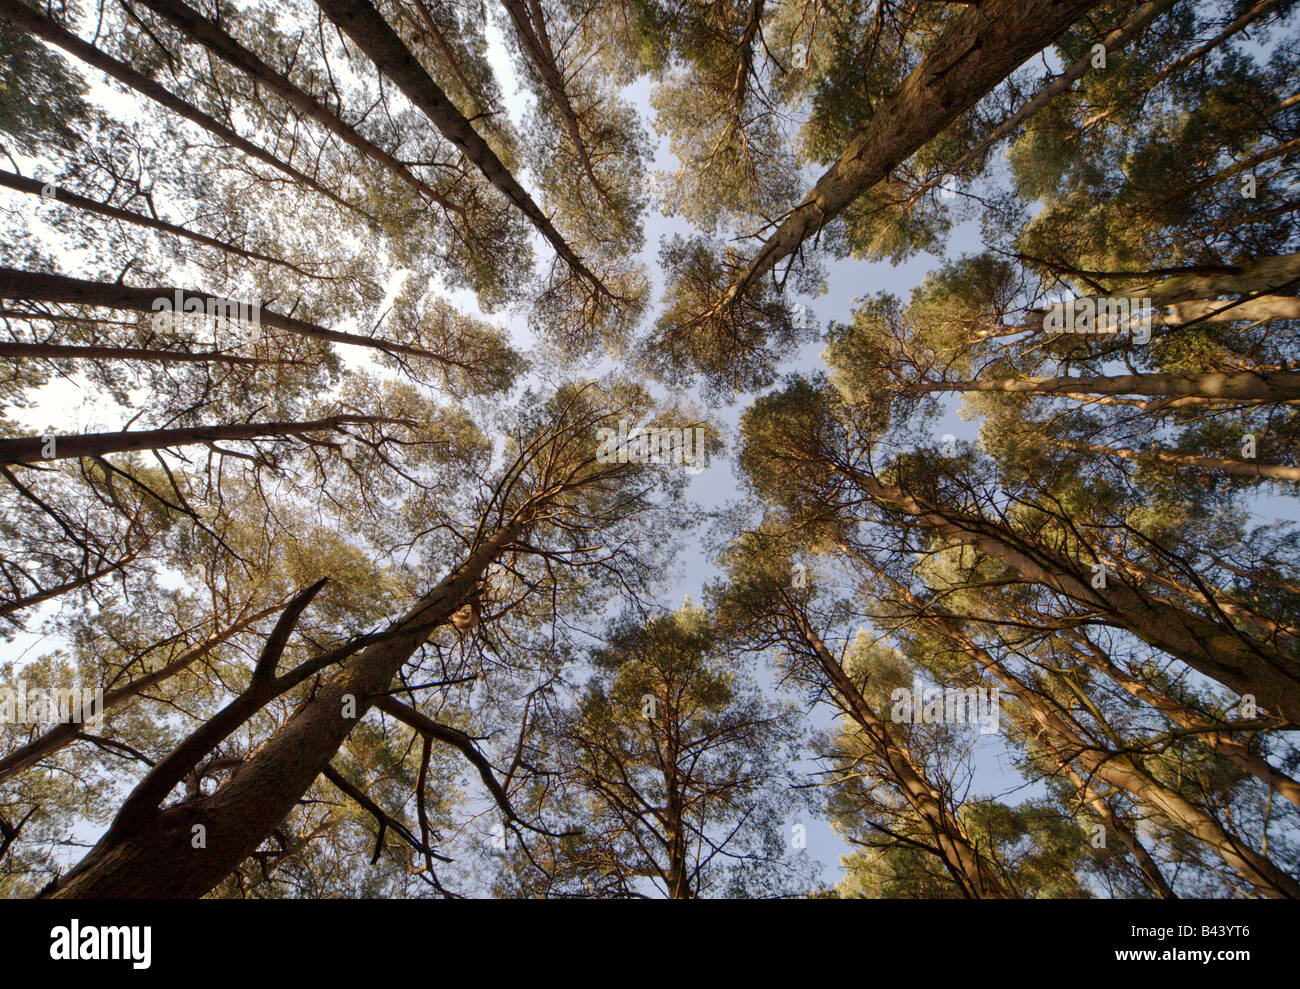 Wide angle view of a pine tree canopy taken from ground level. Stock Photo